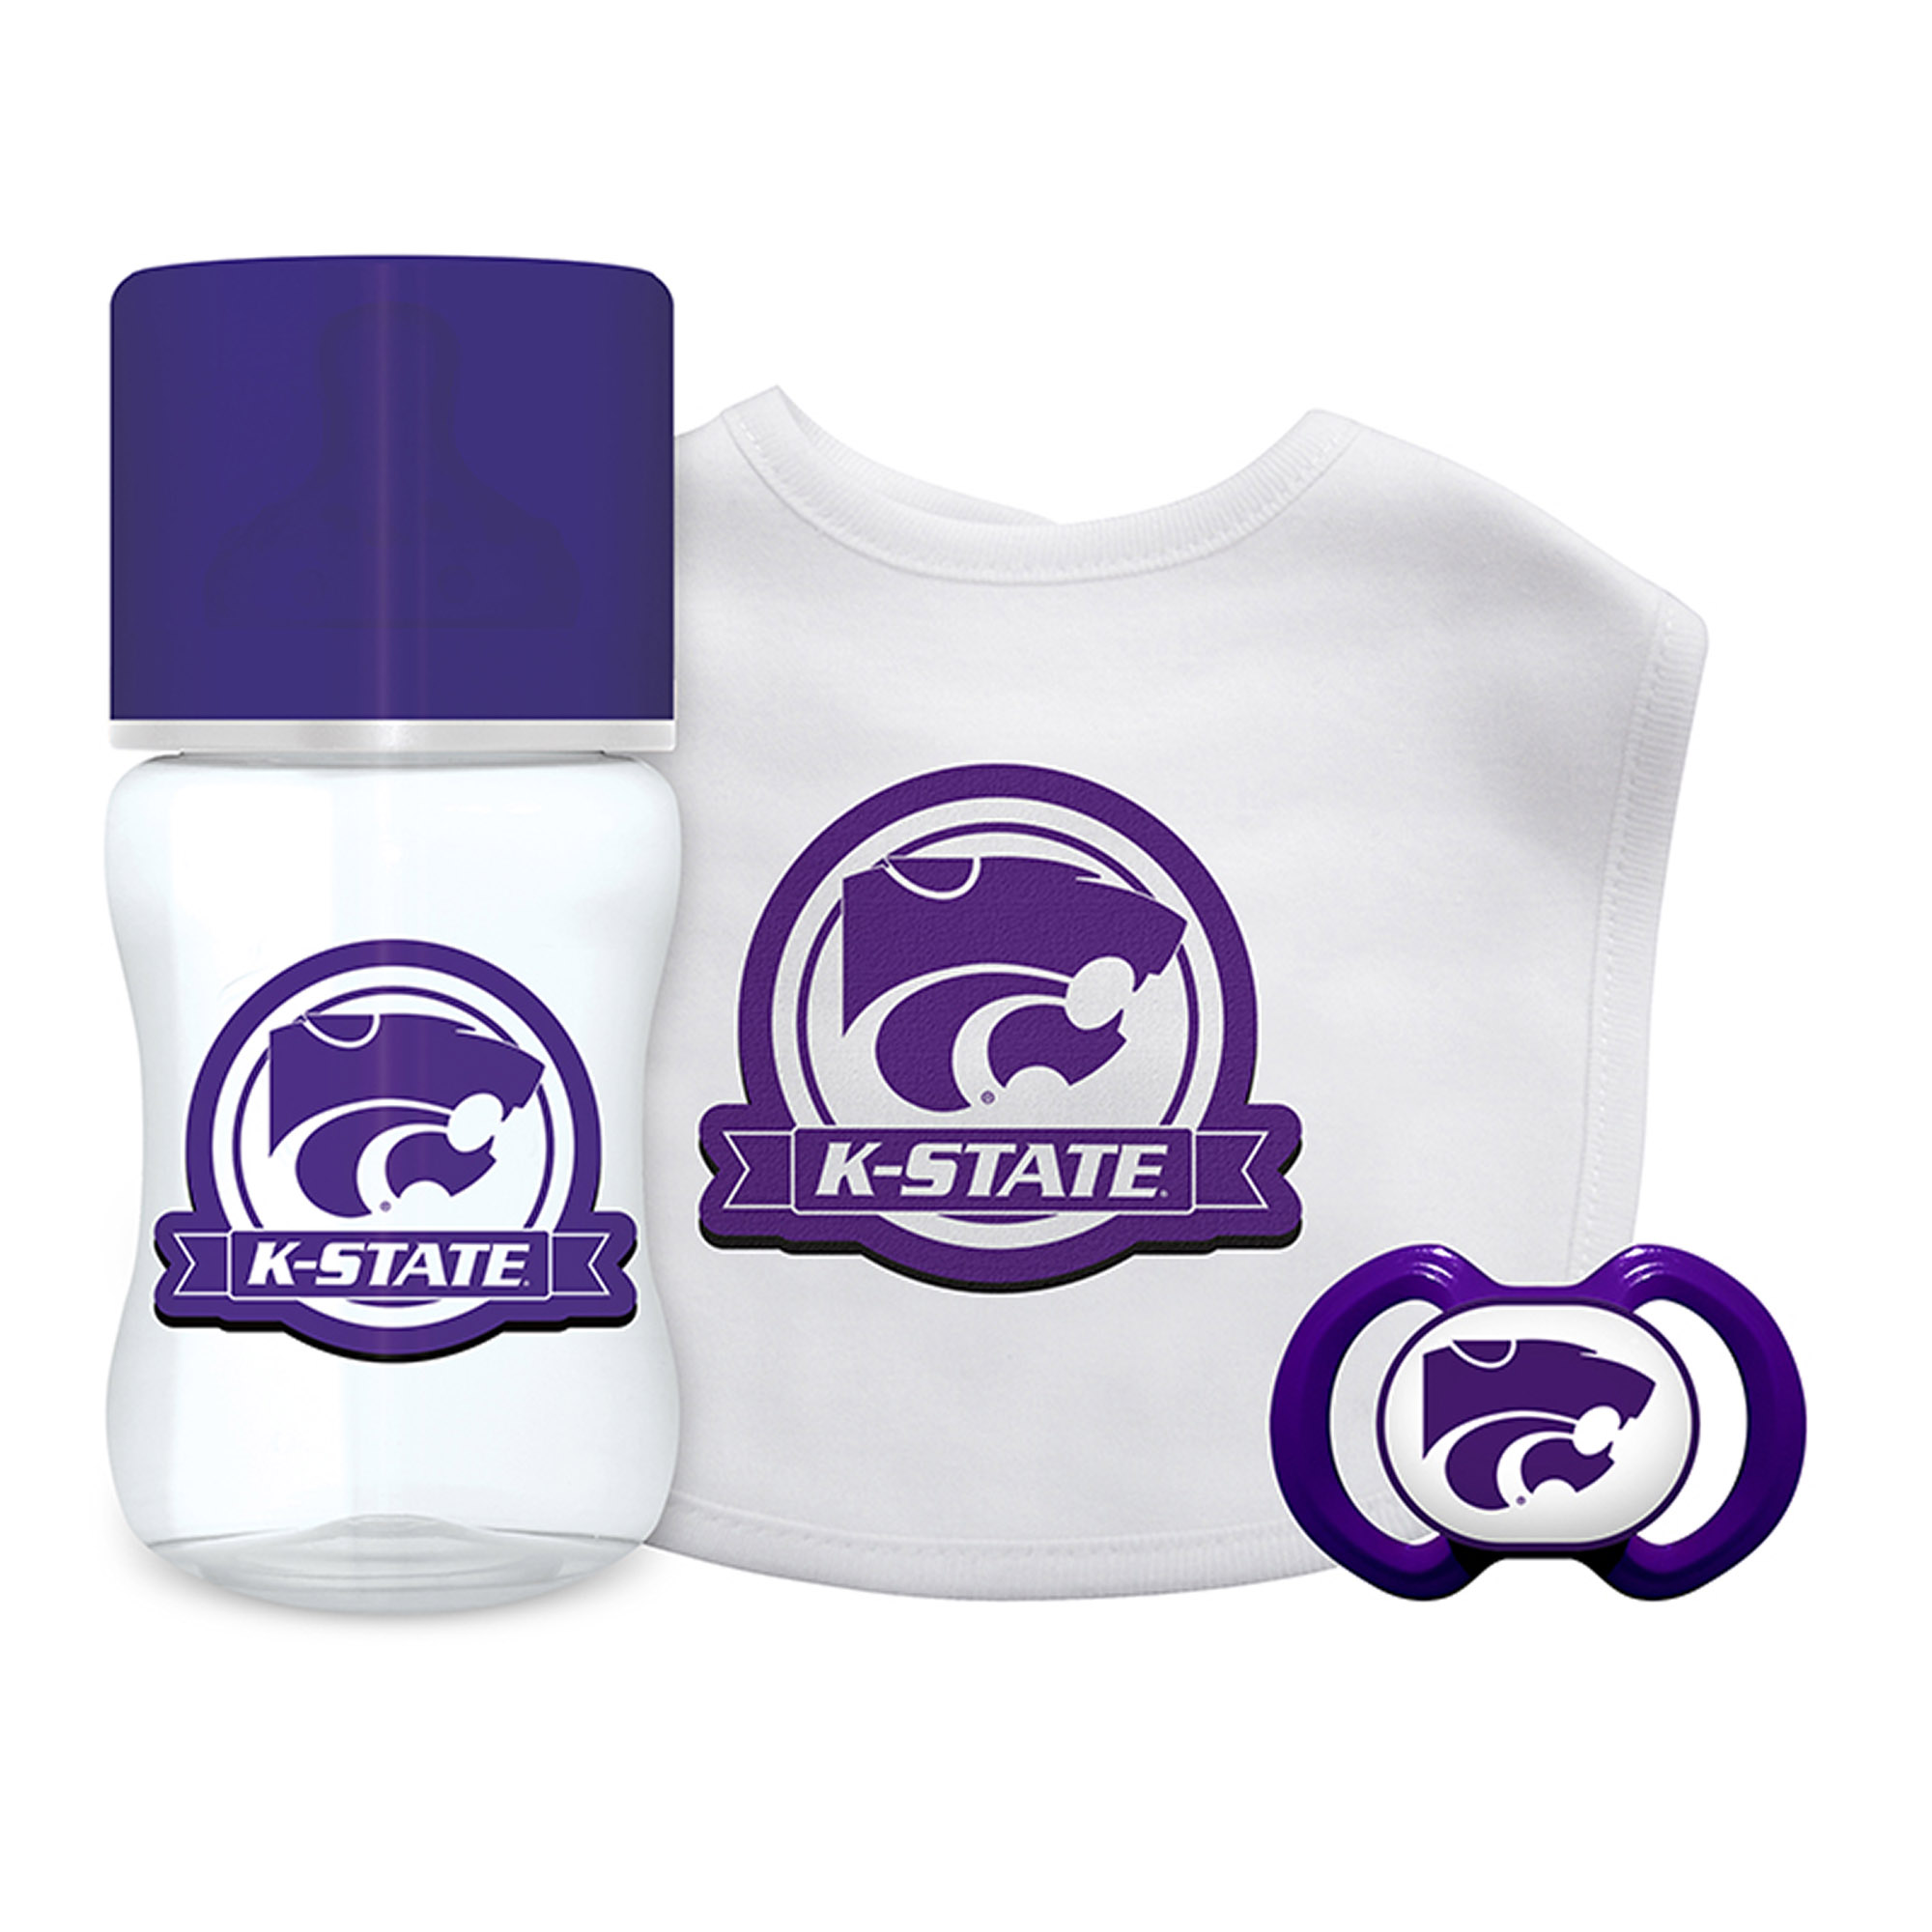 BabyFanatic Officially Licensed 3 Piece Unisex Gift Set - NCAA Kansas State Wildcats - image 1 of 4